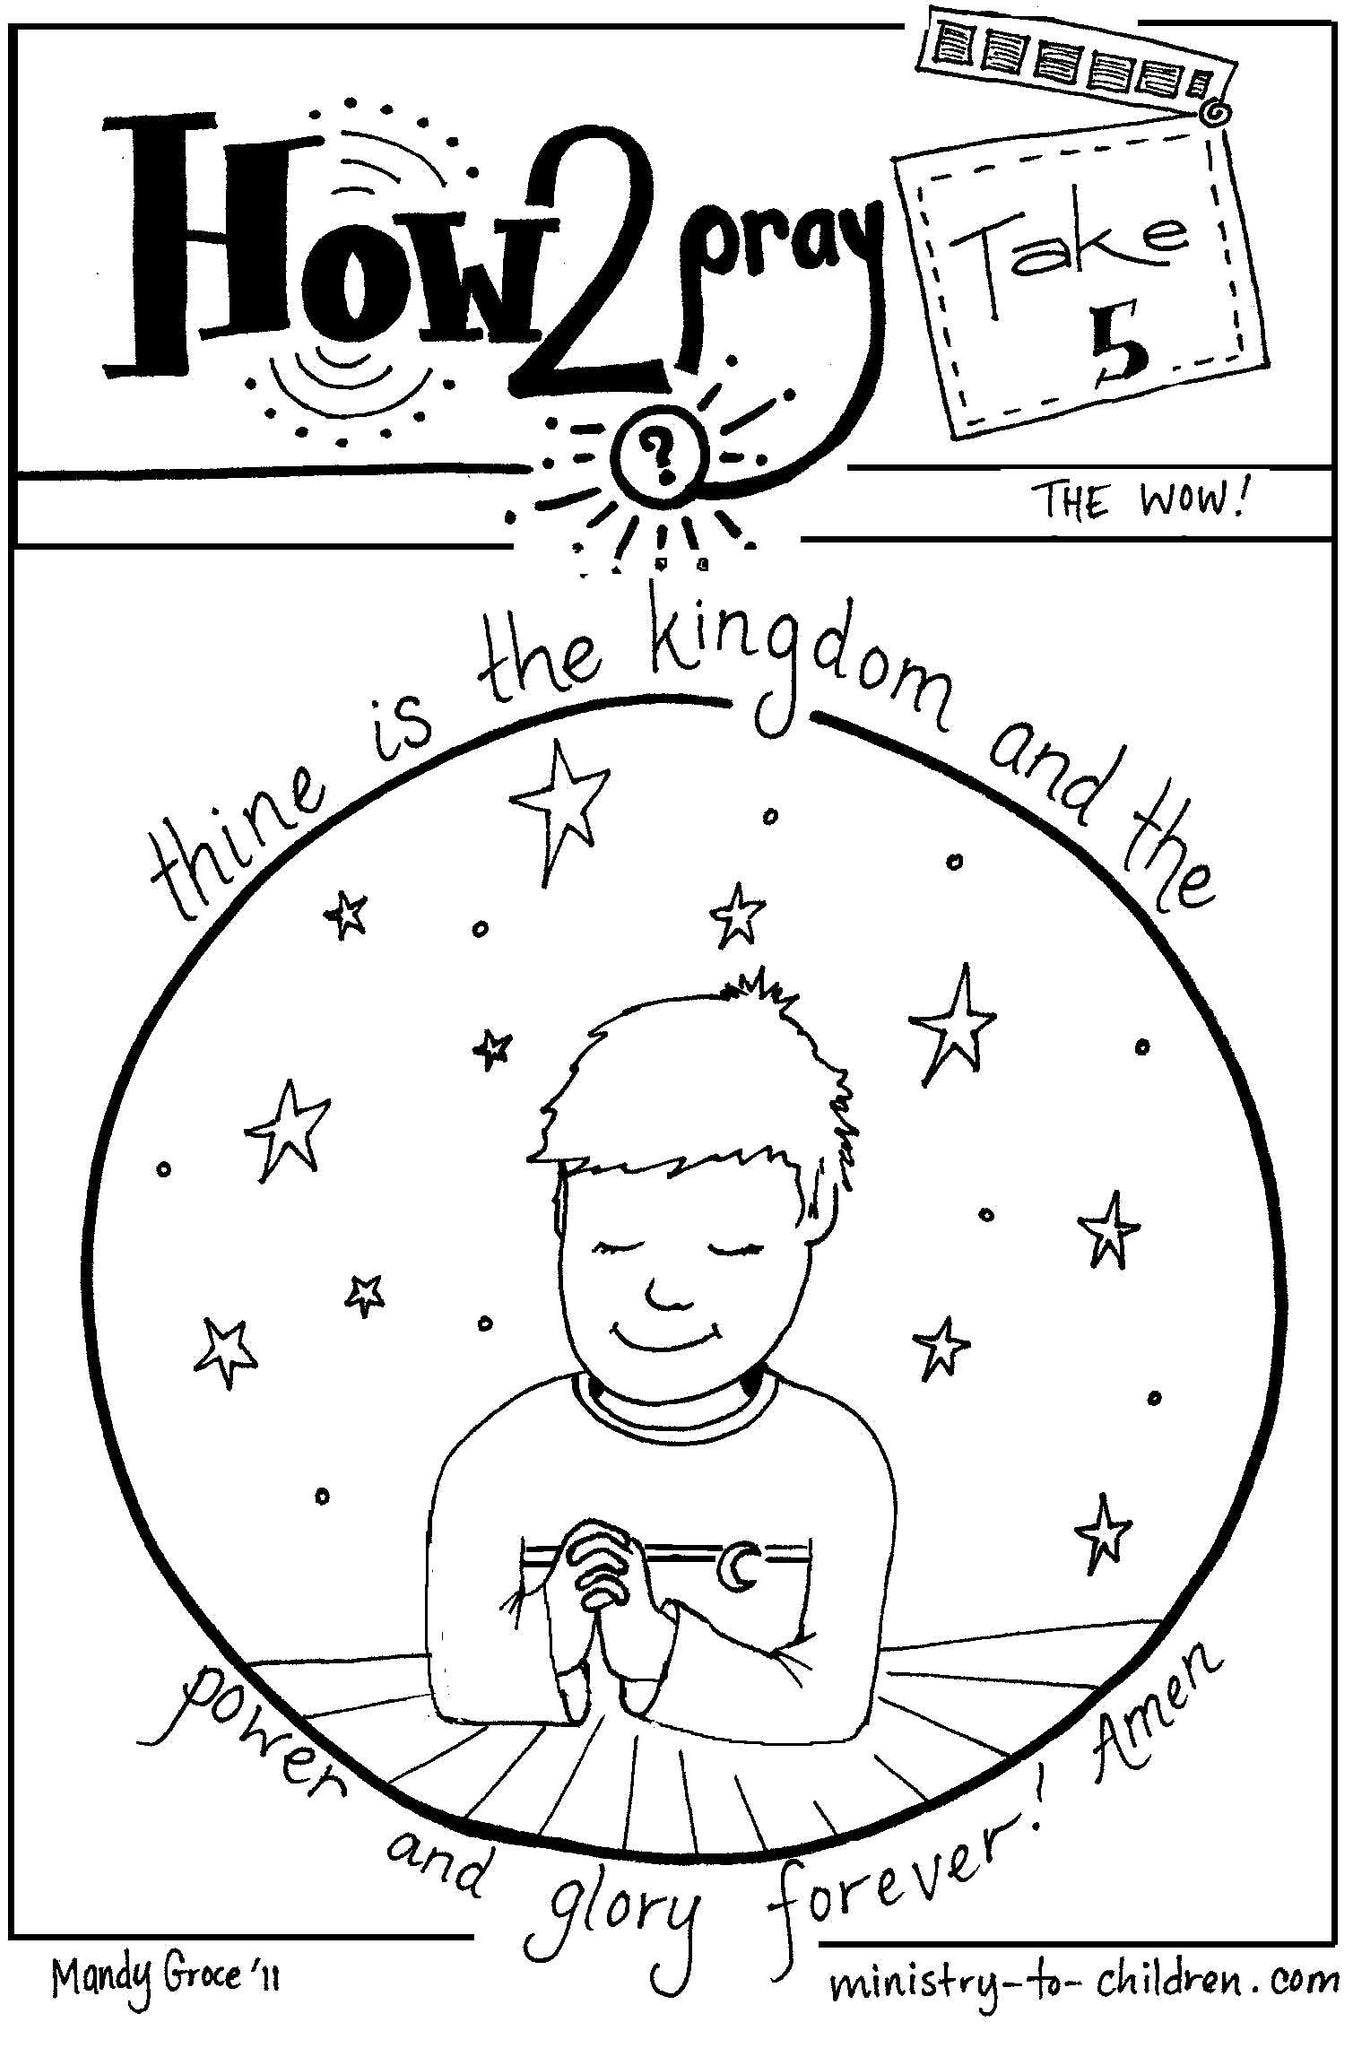 The Lord's Prayer Coloring Book for Kids (FREE) 5 Pages (download only